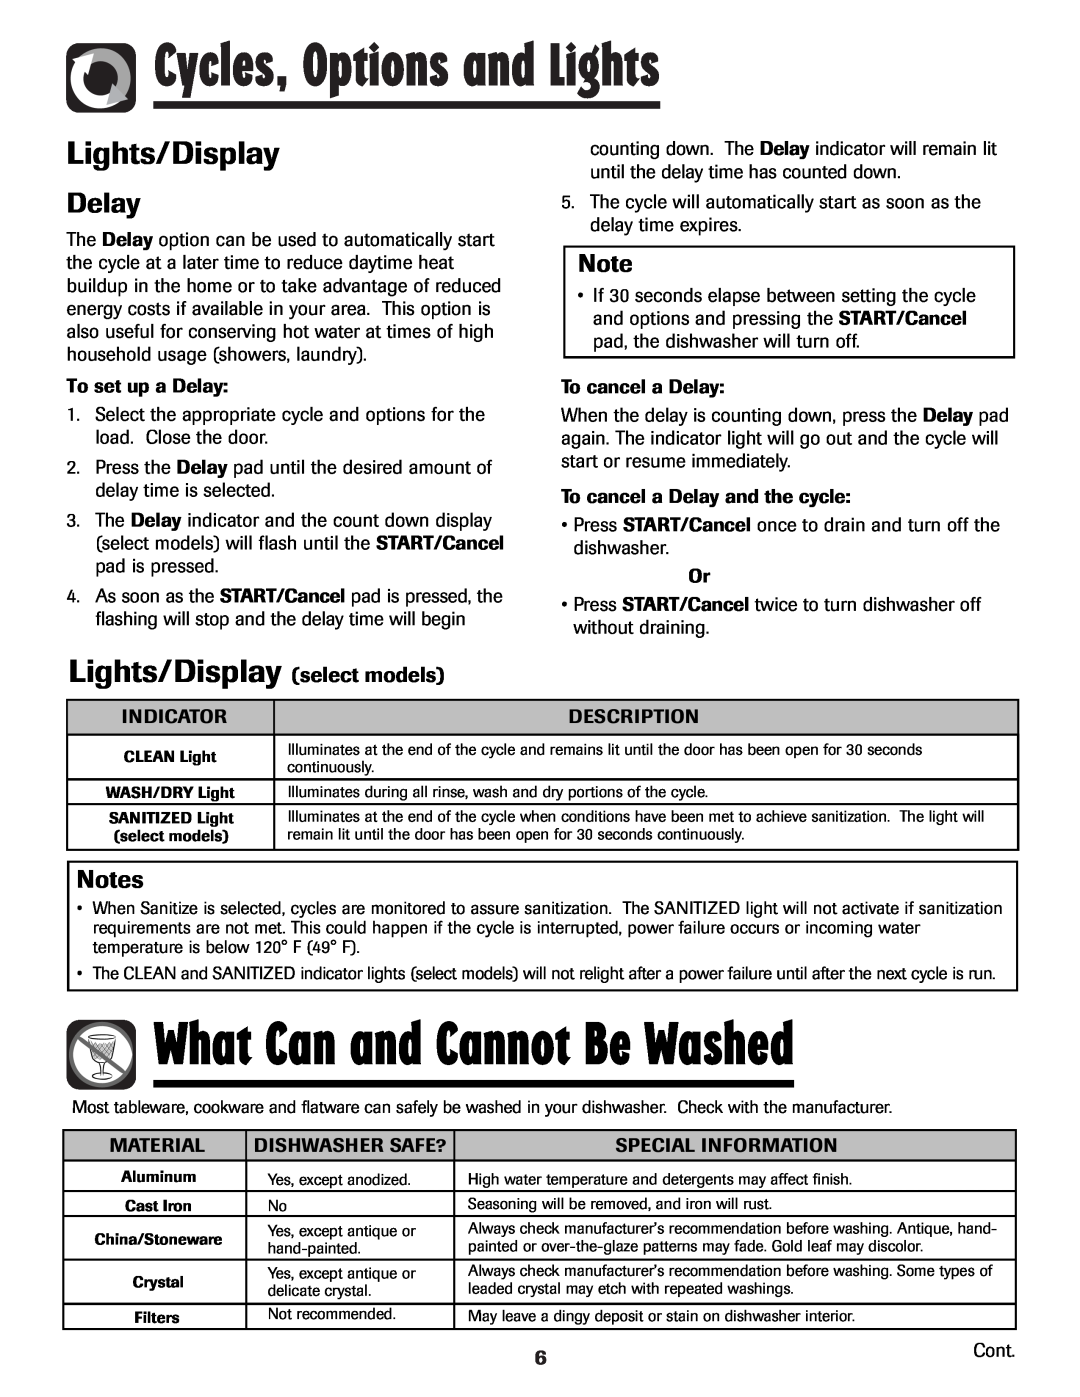 Maytag MDB-7 warranty What Can and Cannot Be Washed, Lights/Display select models, Delay, Cycles, Options and Lights 